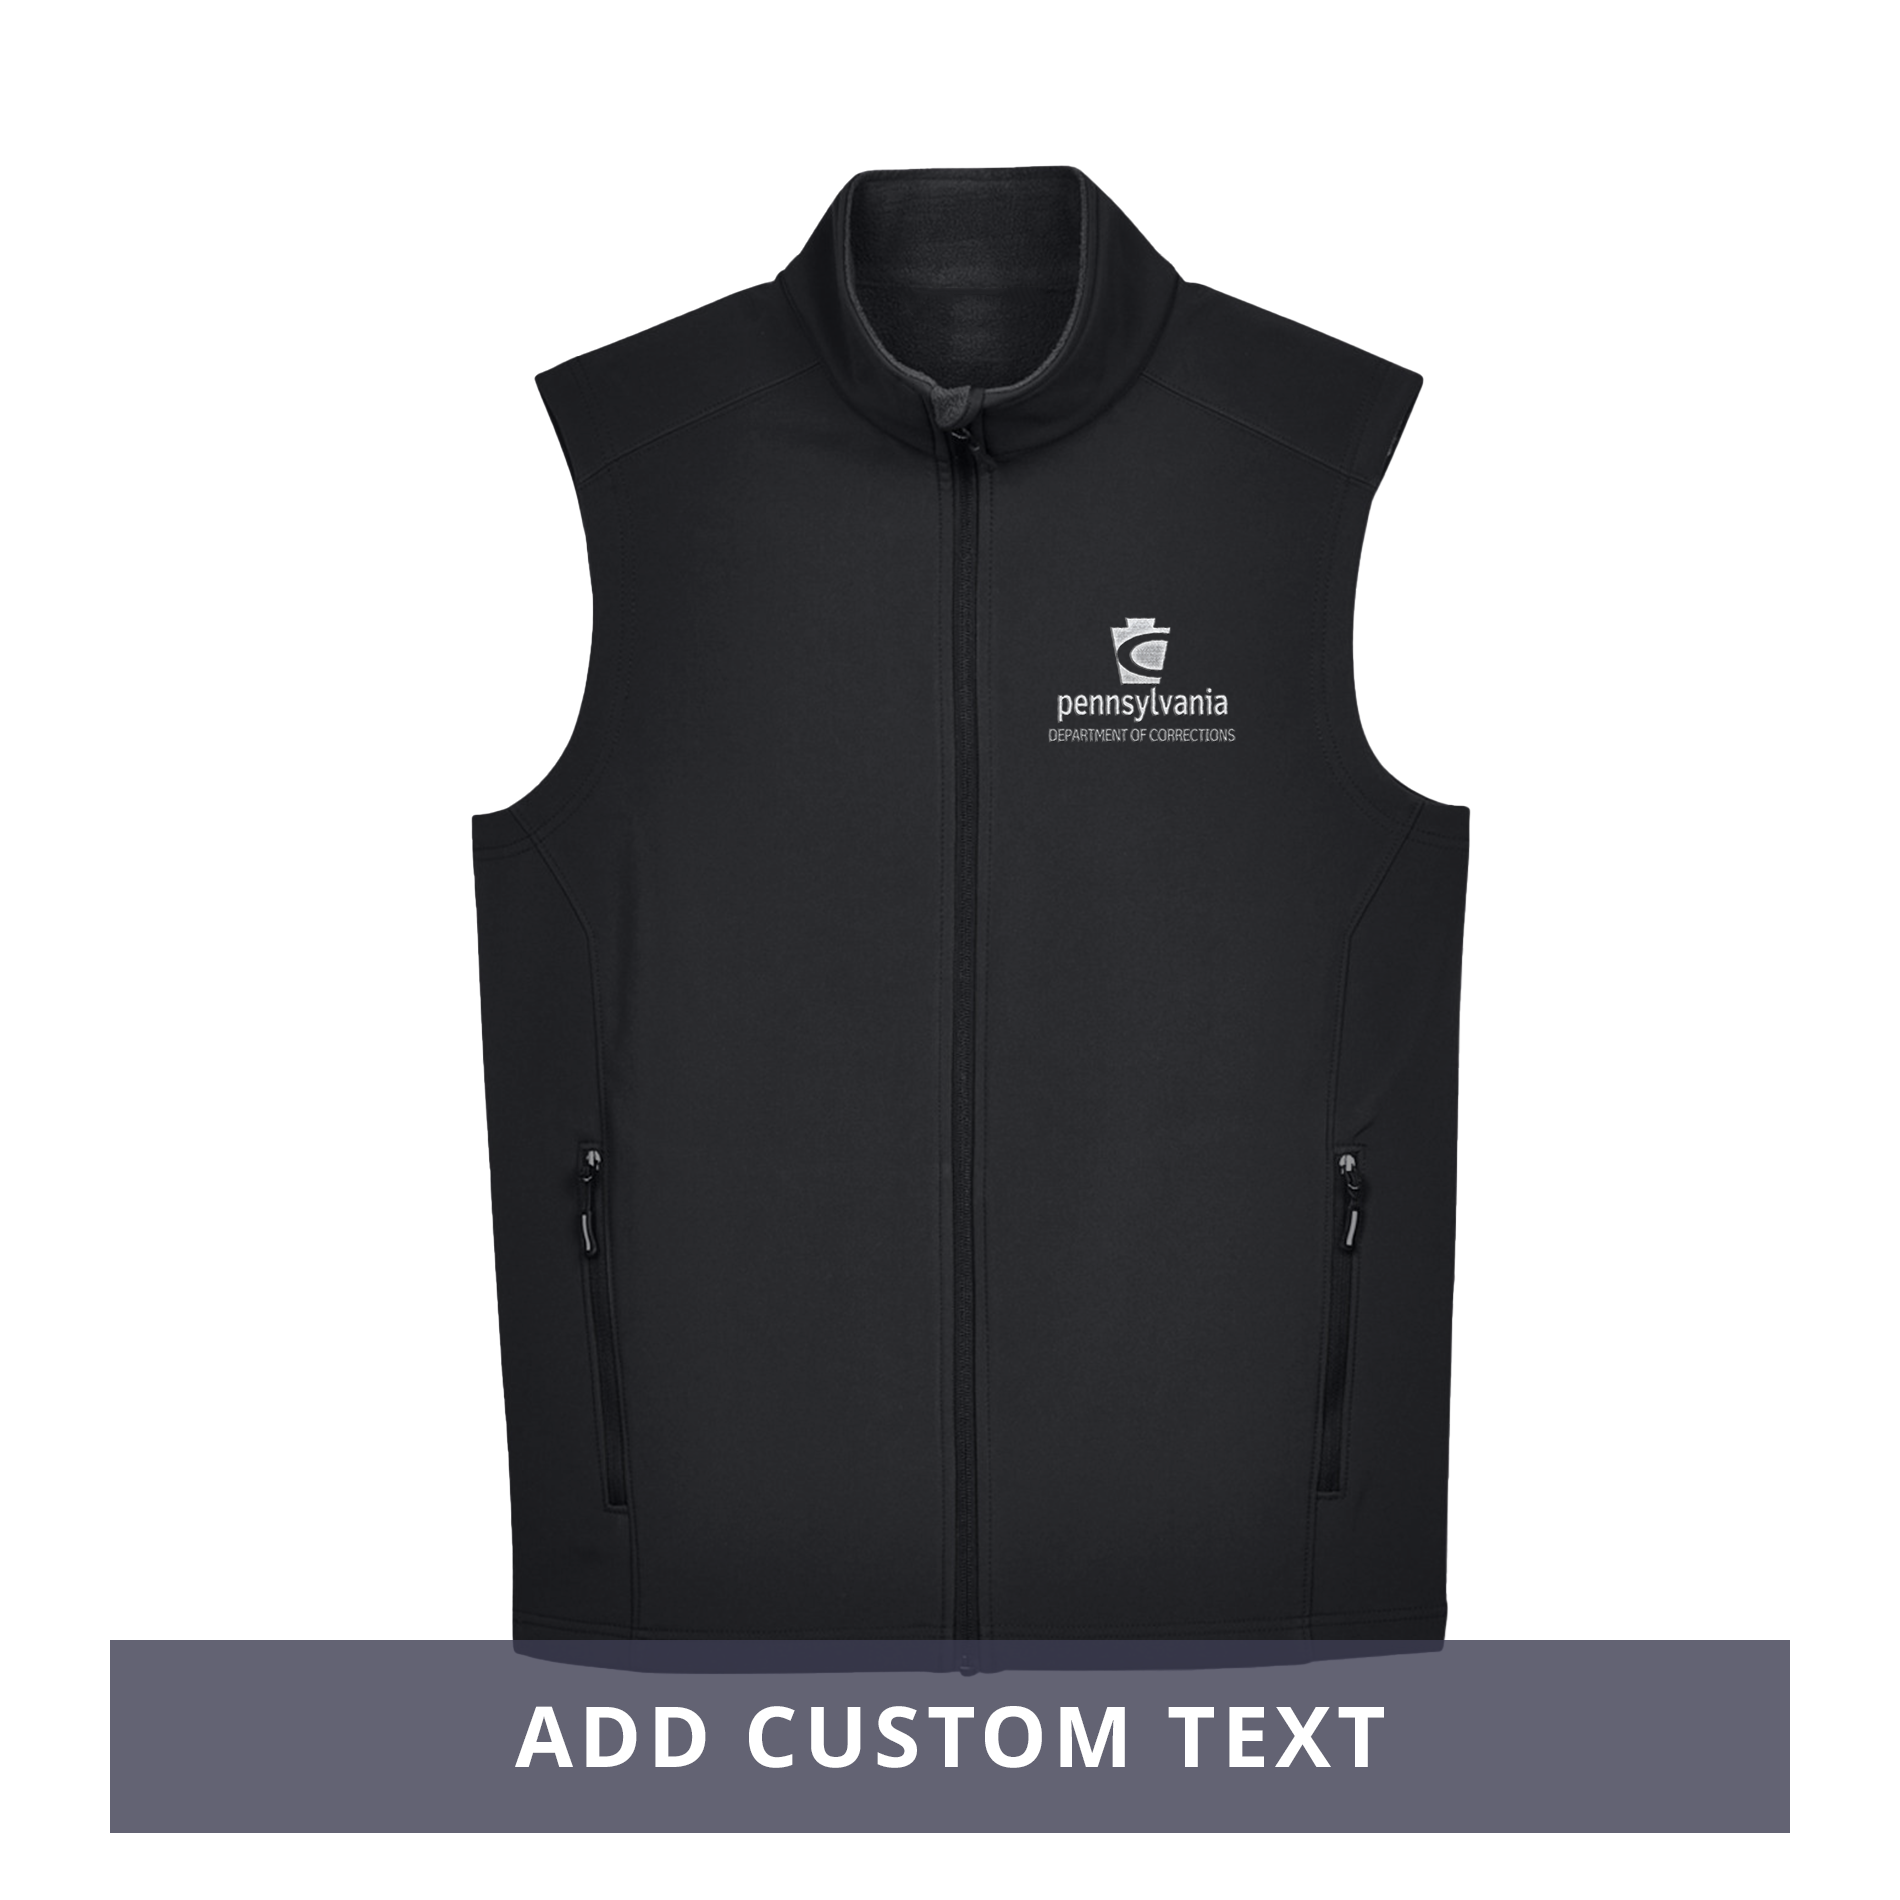 Adult Soft-Shell Vest with Embroidered Department of Corrections Keyst